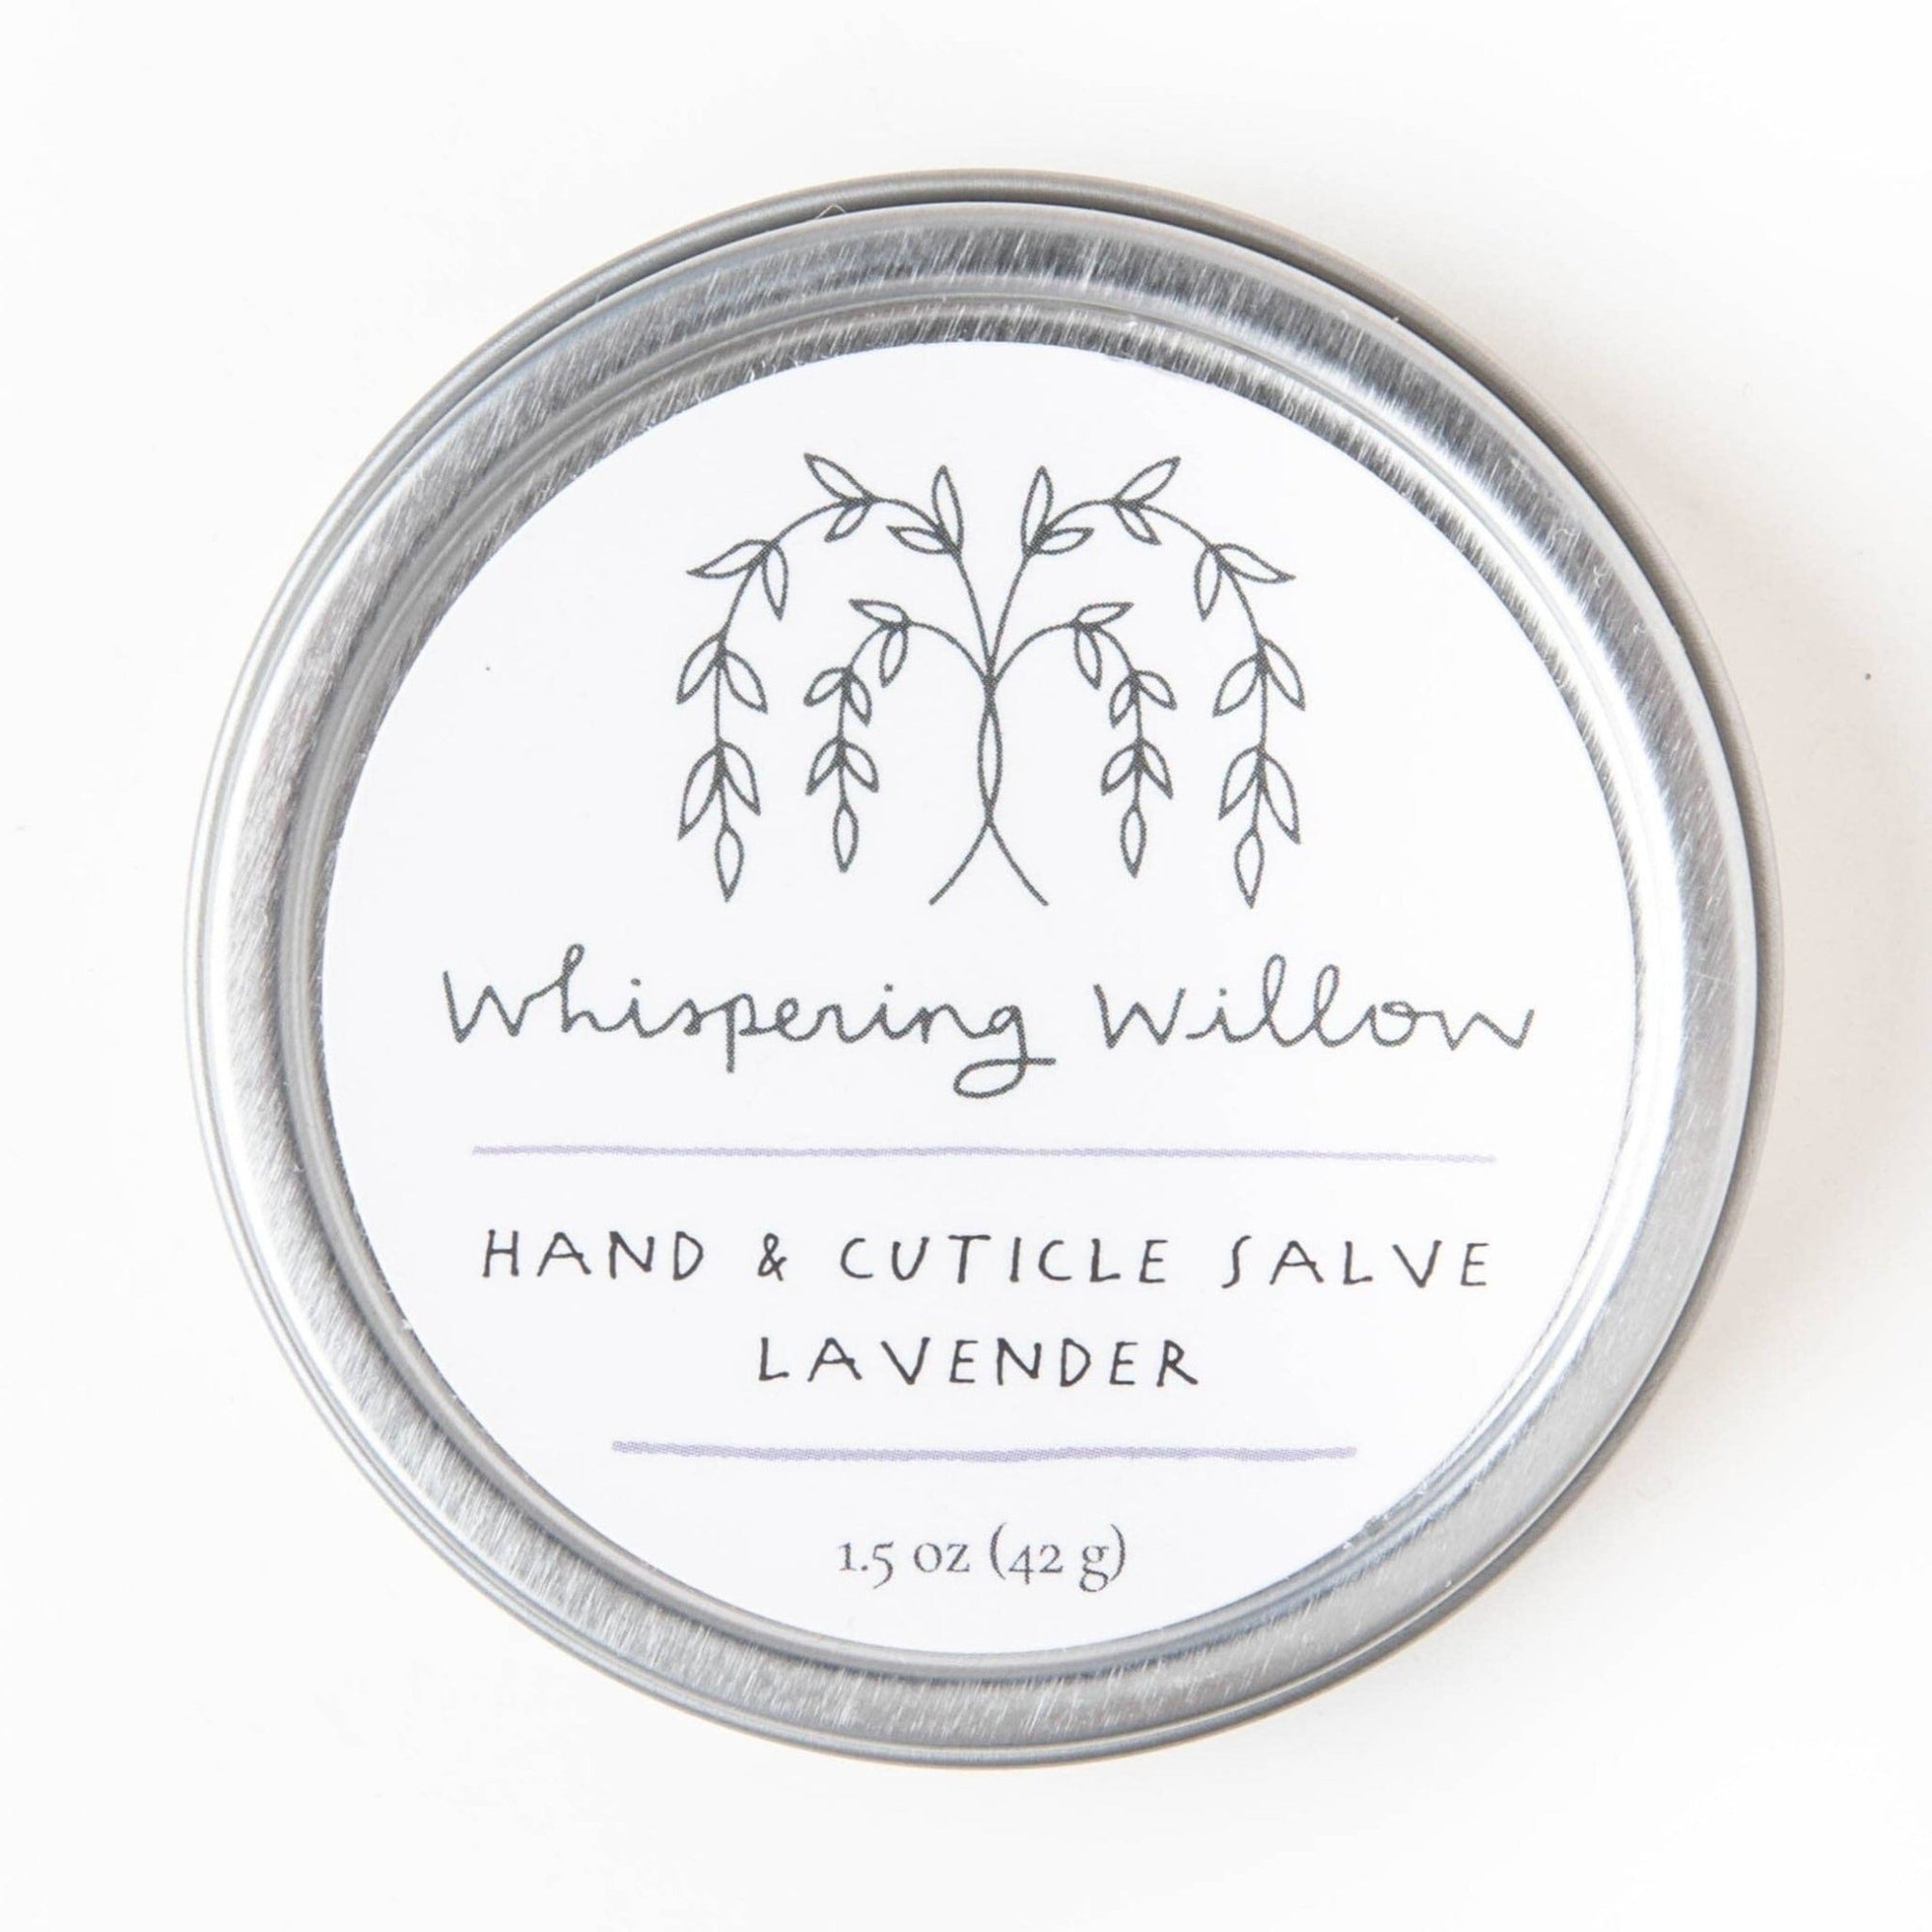 Hand & Cuticle Salve - Lavender - Gift & Gather